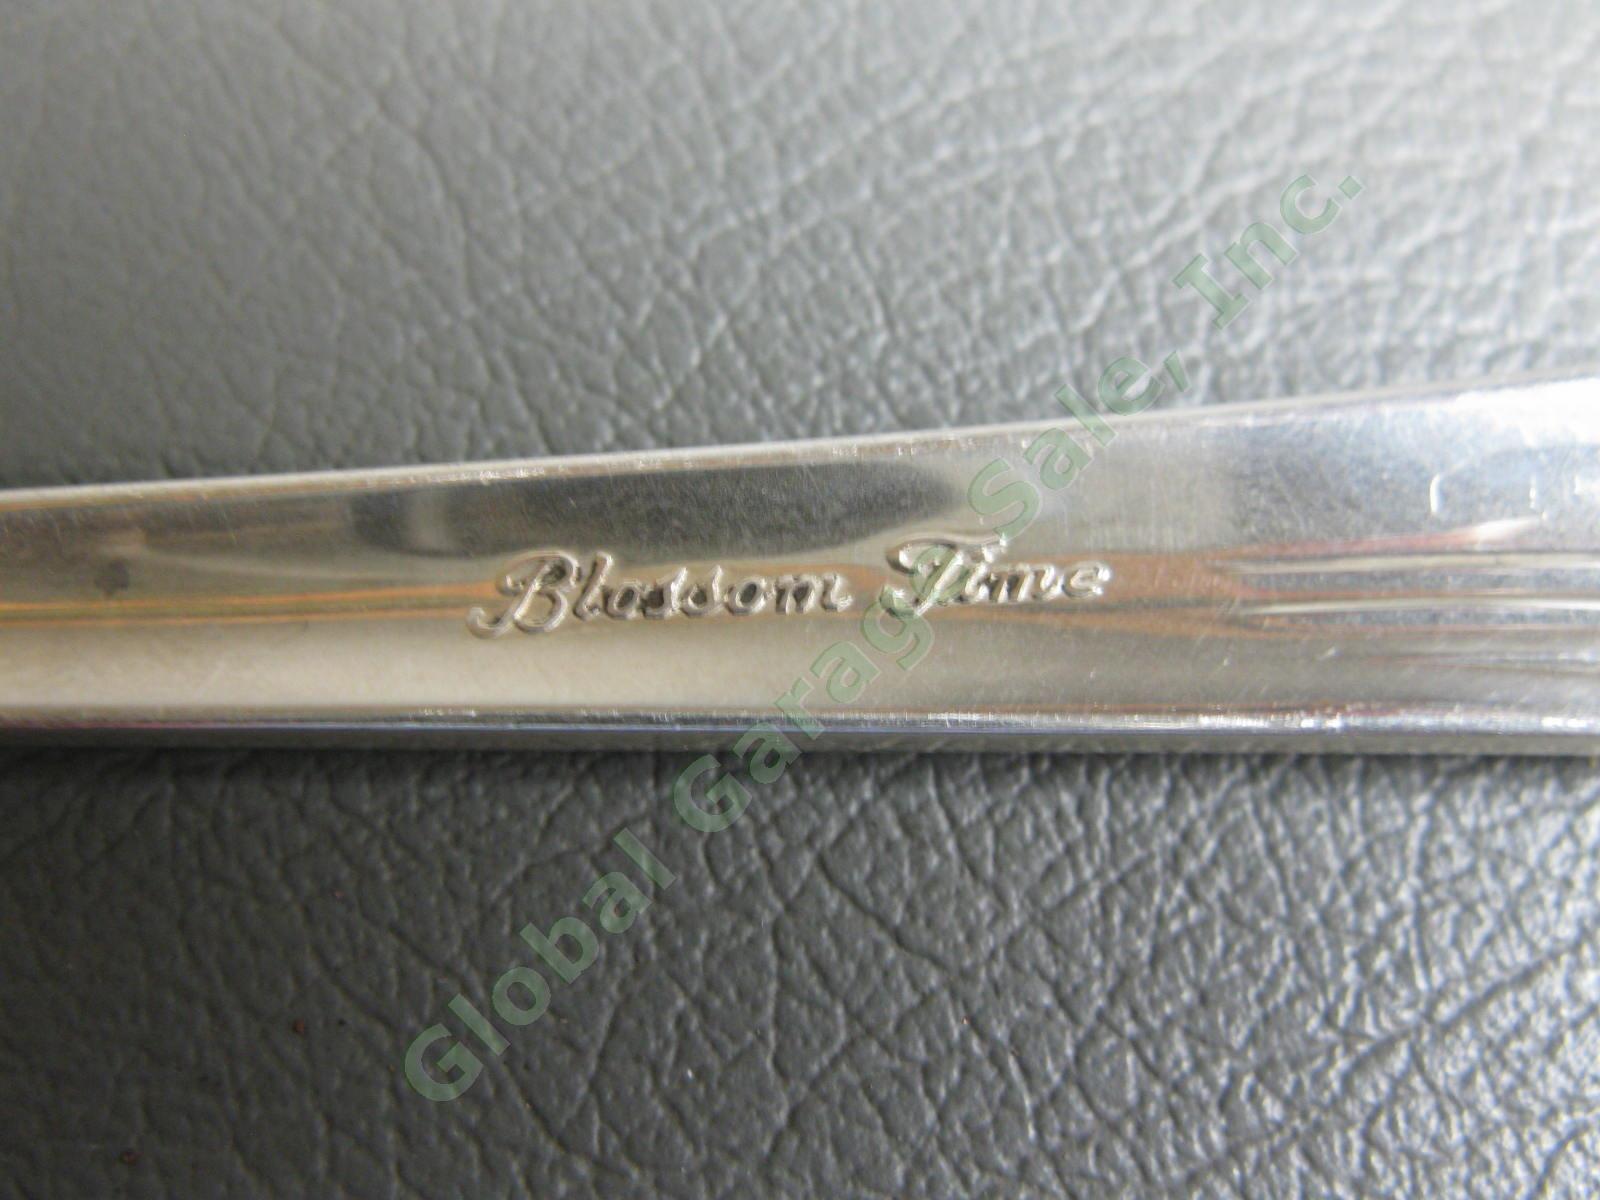 4 International Sterling Silver Blossom Time Tablespoons Serving Spoon Set 252g 4